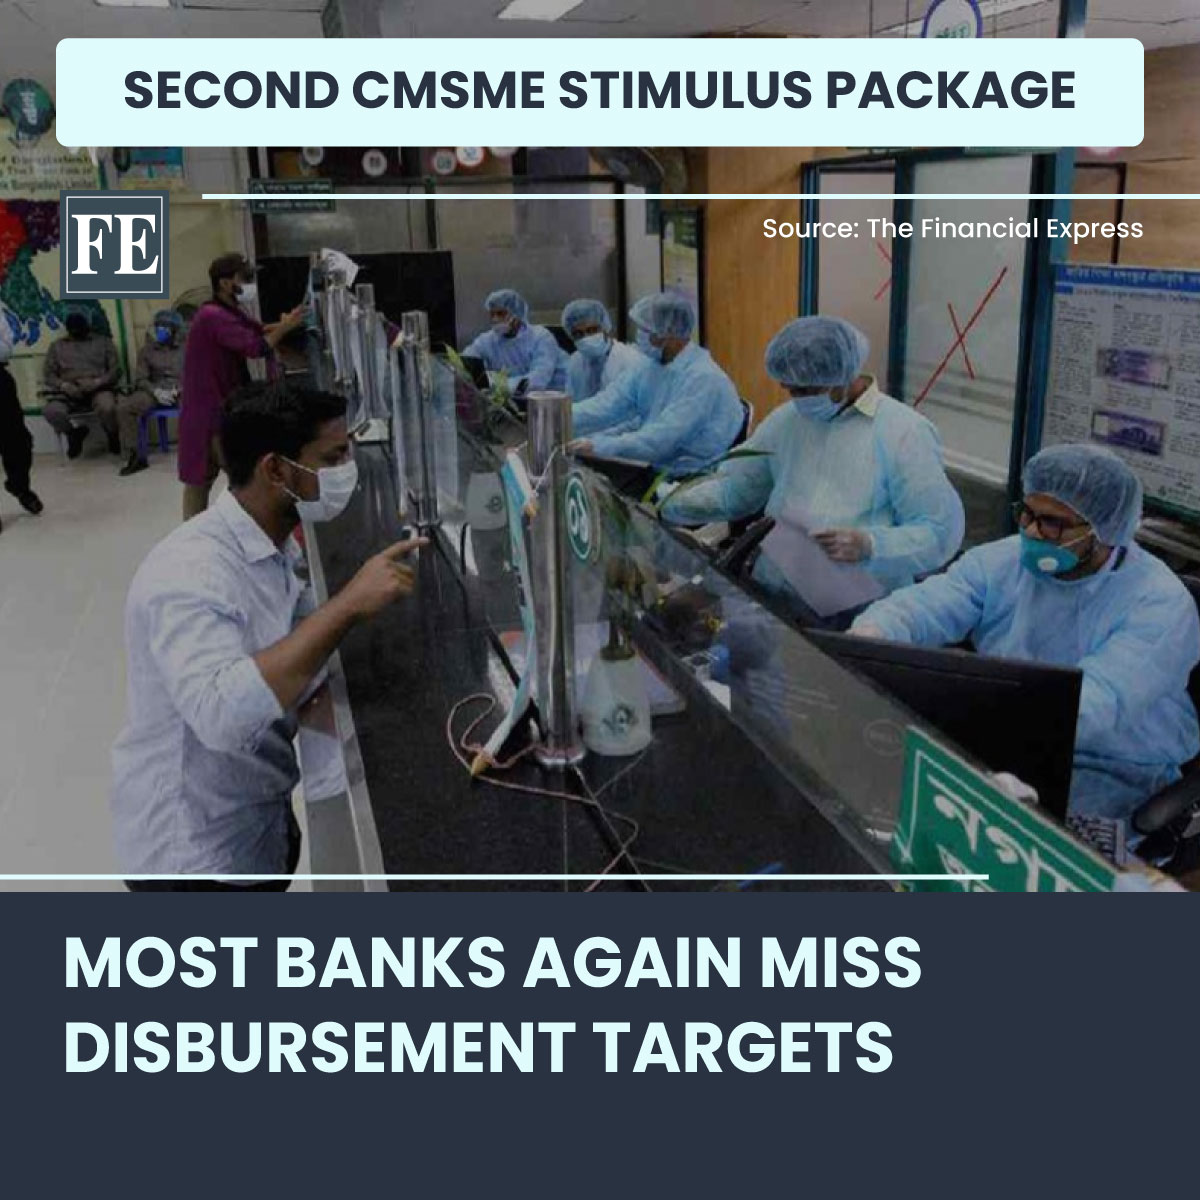 Most banks are about to miss the target of lending from the second tranche of recovery stimulus also to CMSMEs. https://t.co/AWAYLswHmU